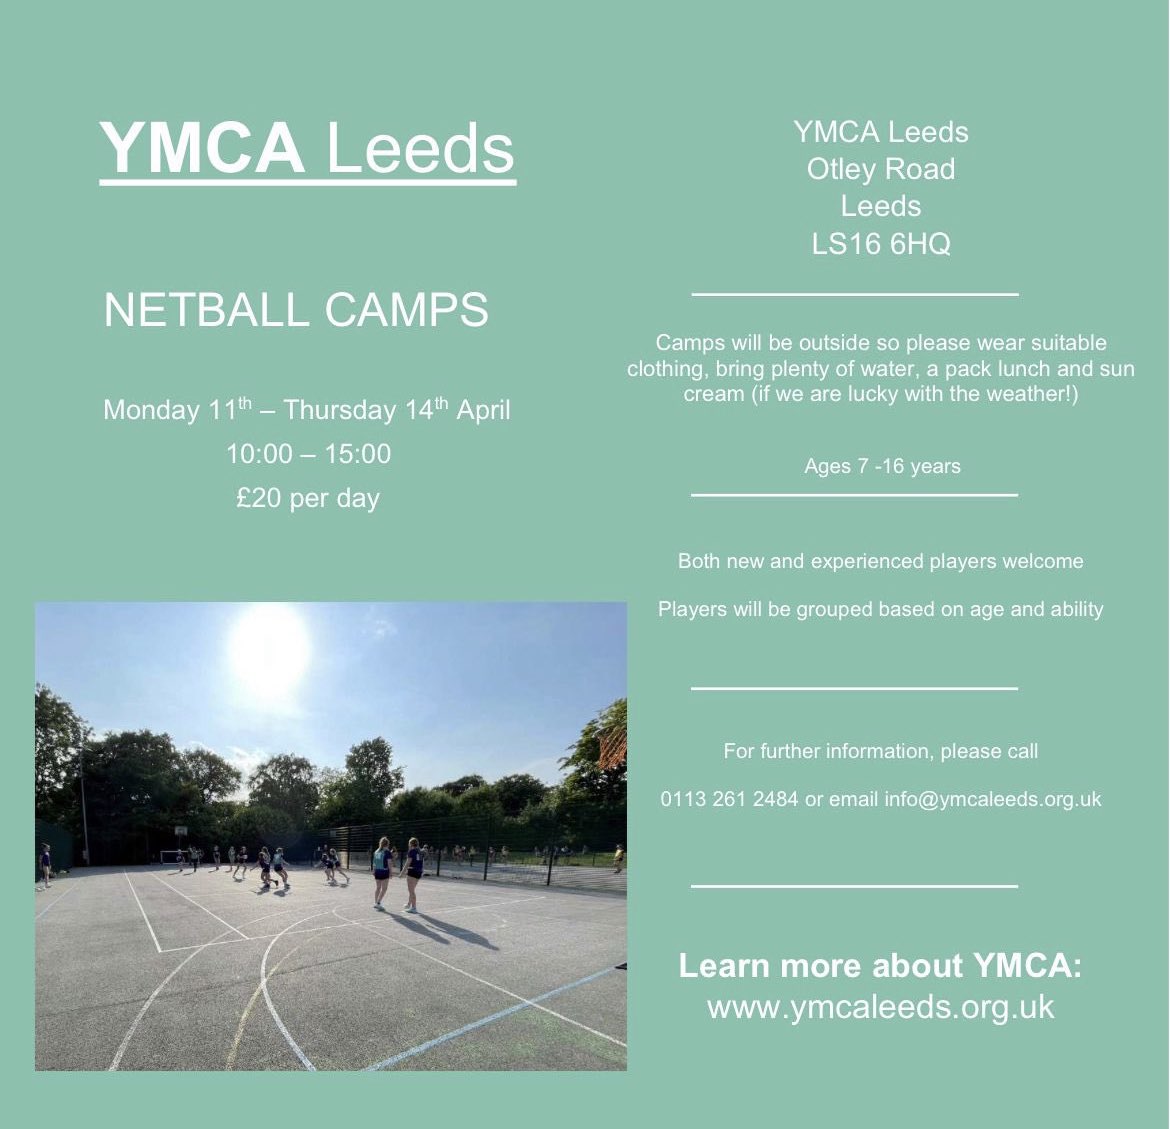 Don’t forget to book your place! Spaces are available on first come first serve and some days are already busy! #ymcanetball #netballleeds #netballcamps